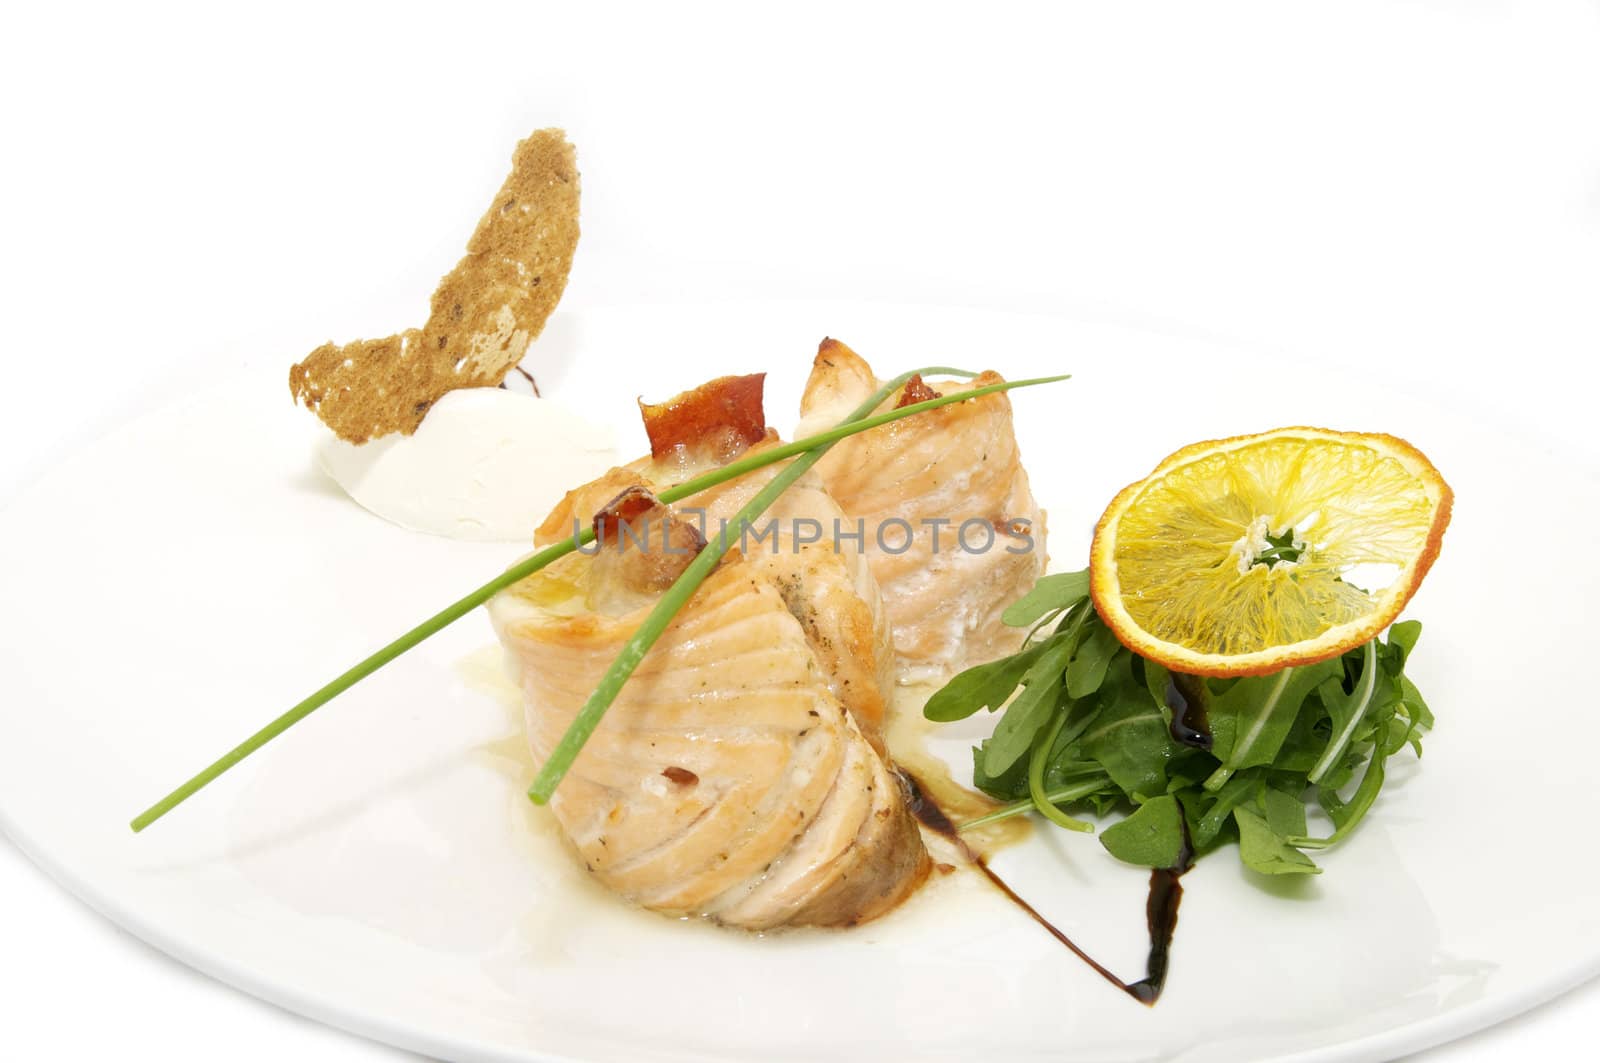 Fried fish with greens and rolls on a plate